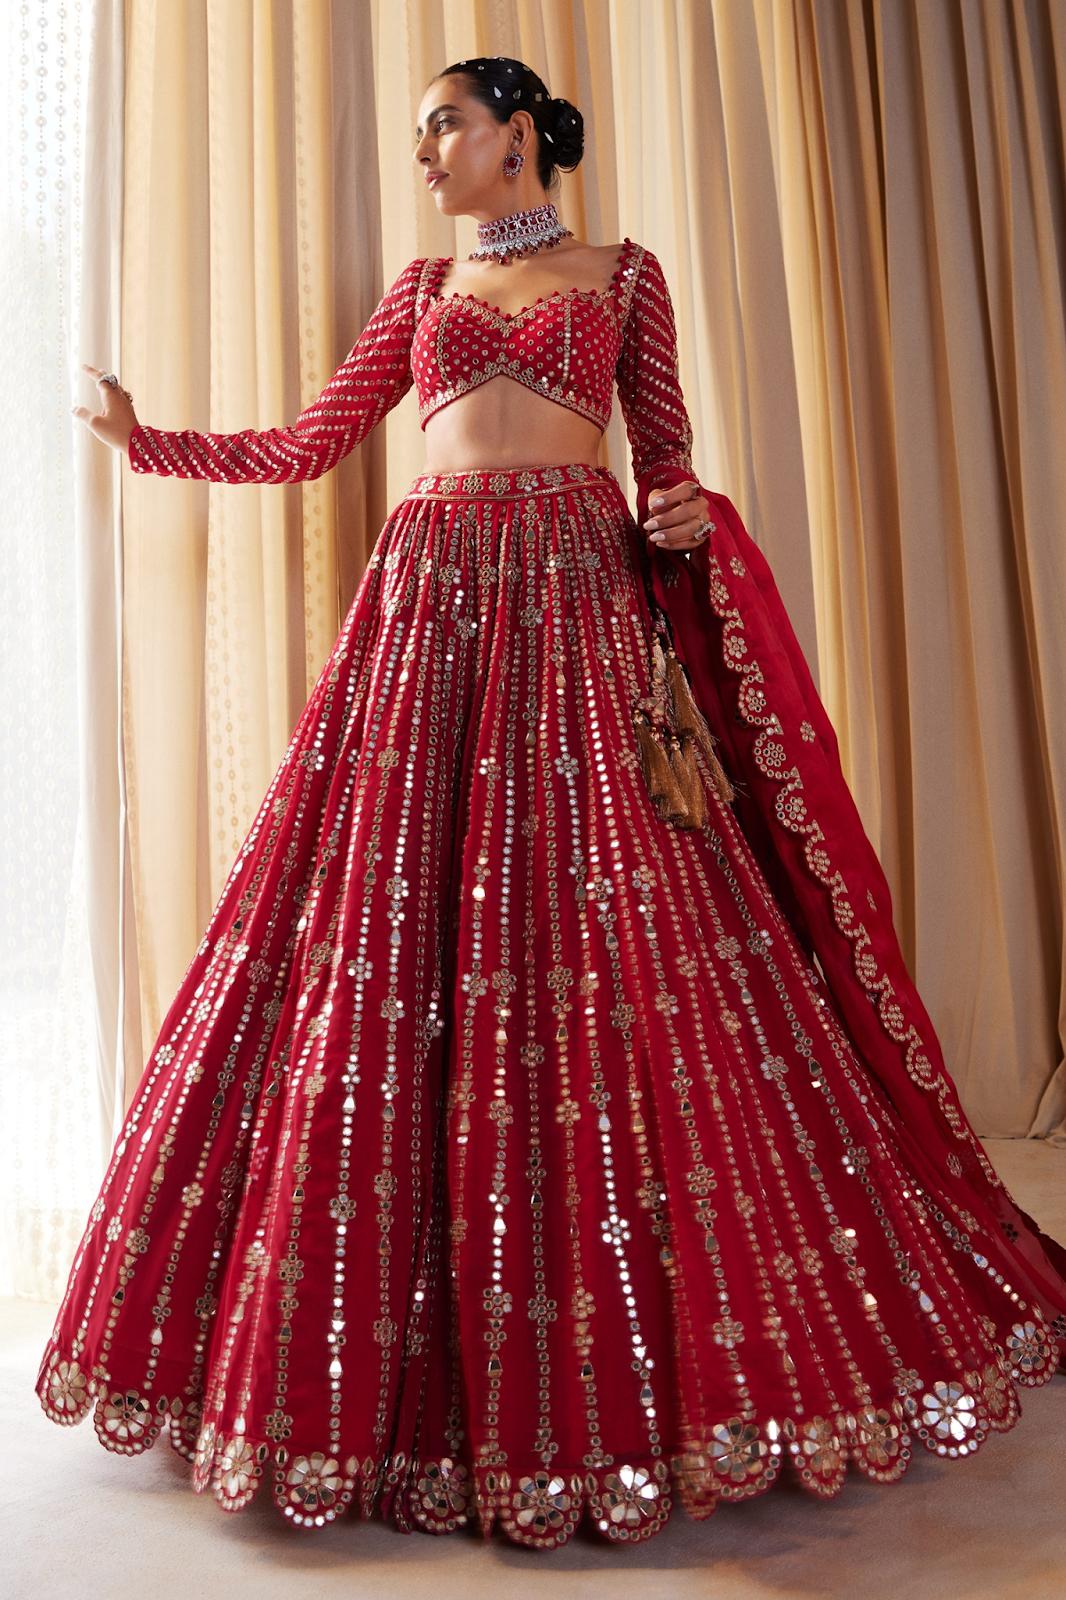 Burgundy Embroidered Bridal Lehenga Set With 2 Dupattas Design by Dolly J  at Pernia's Pop Up Shop 2023